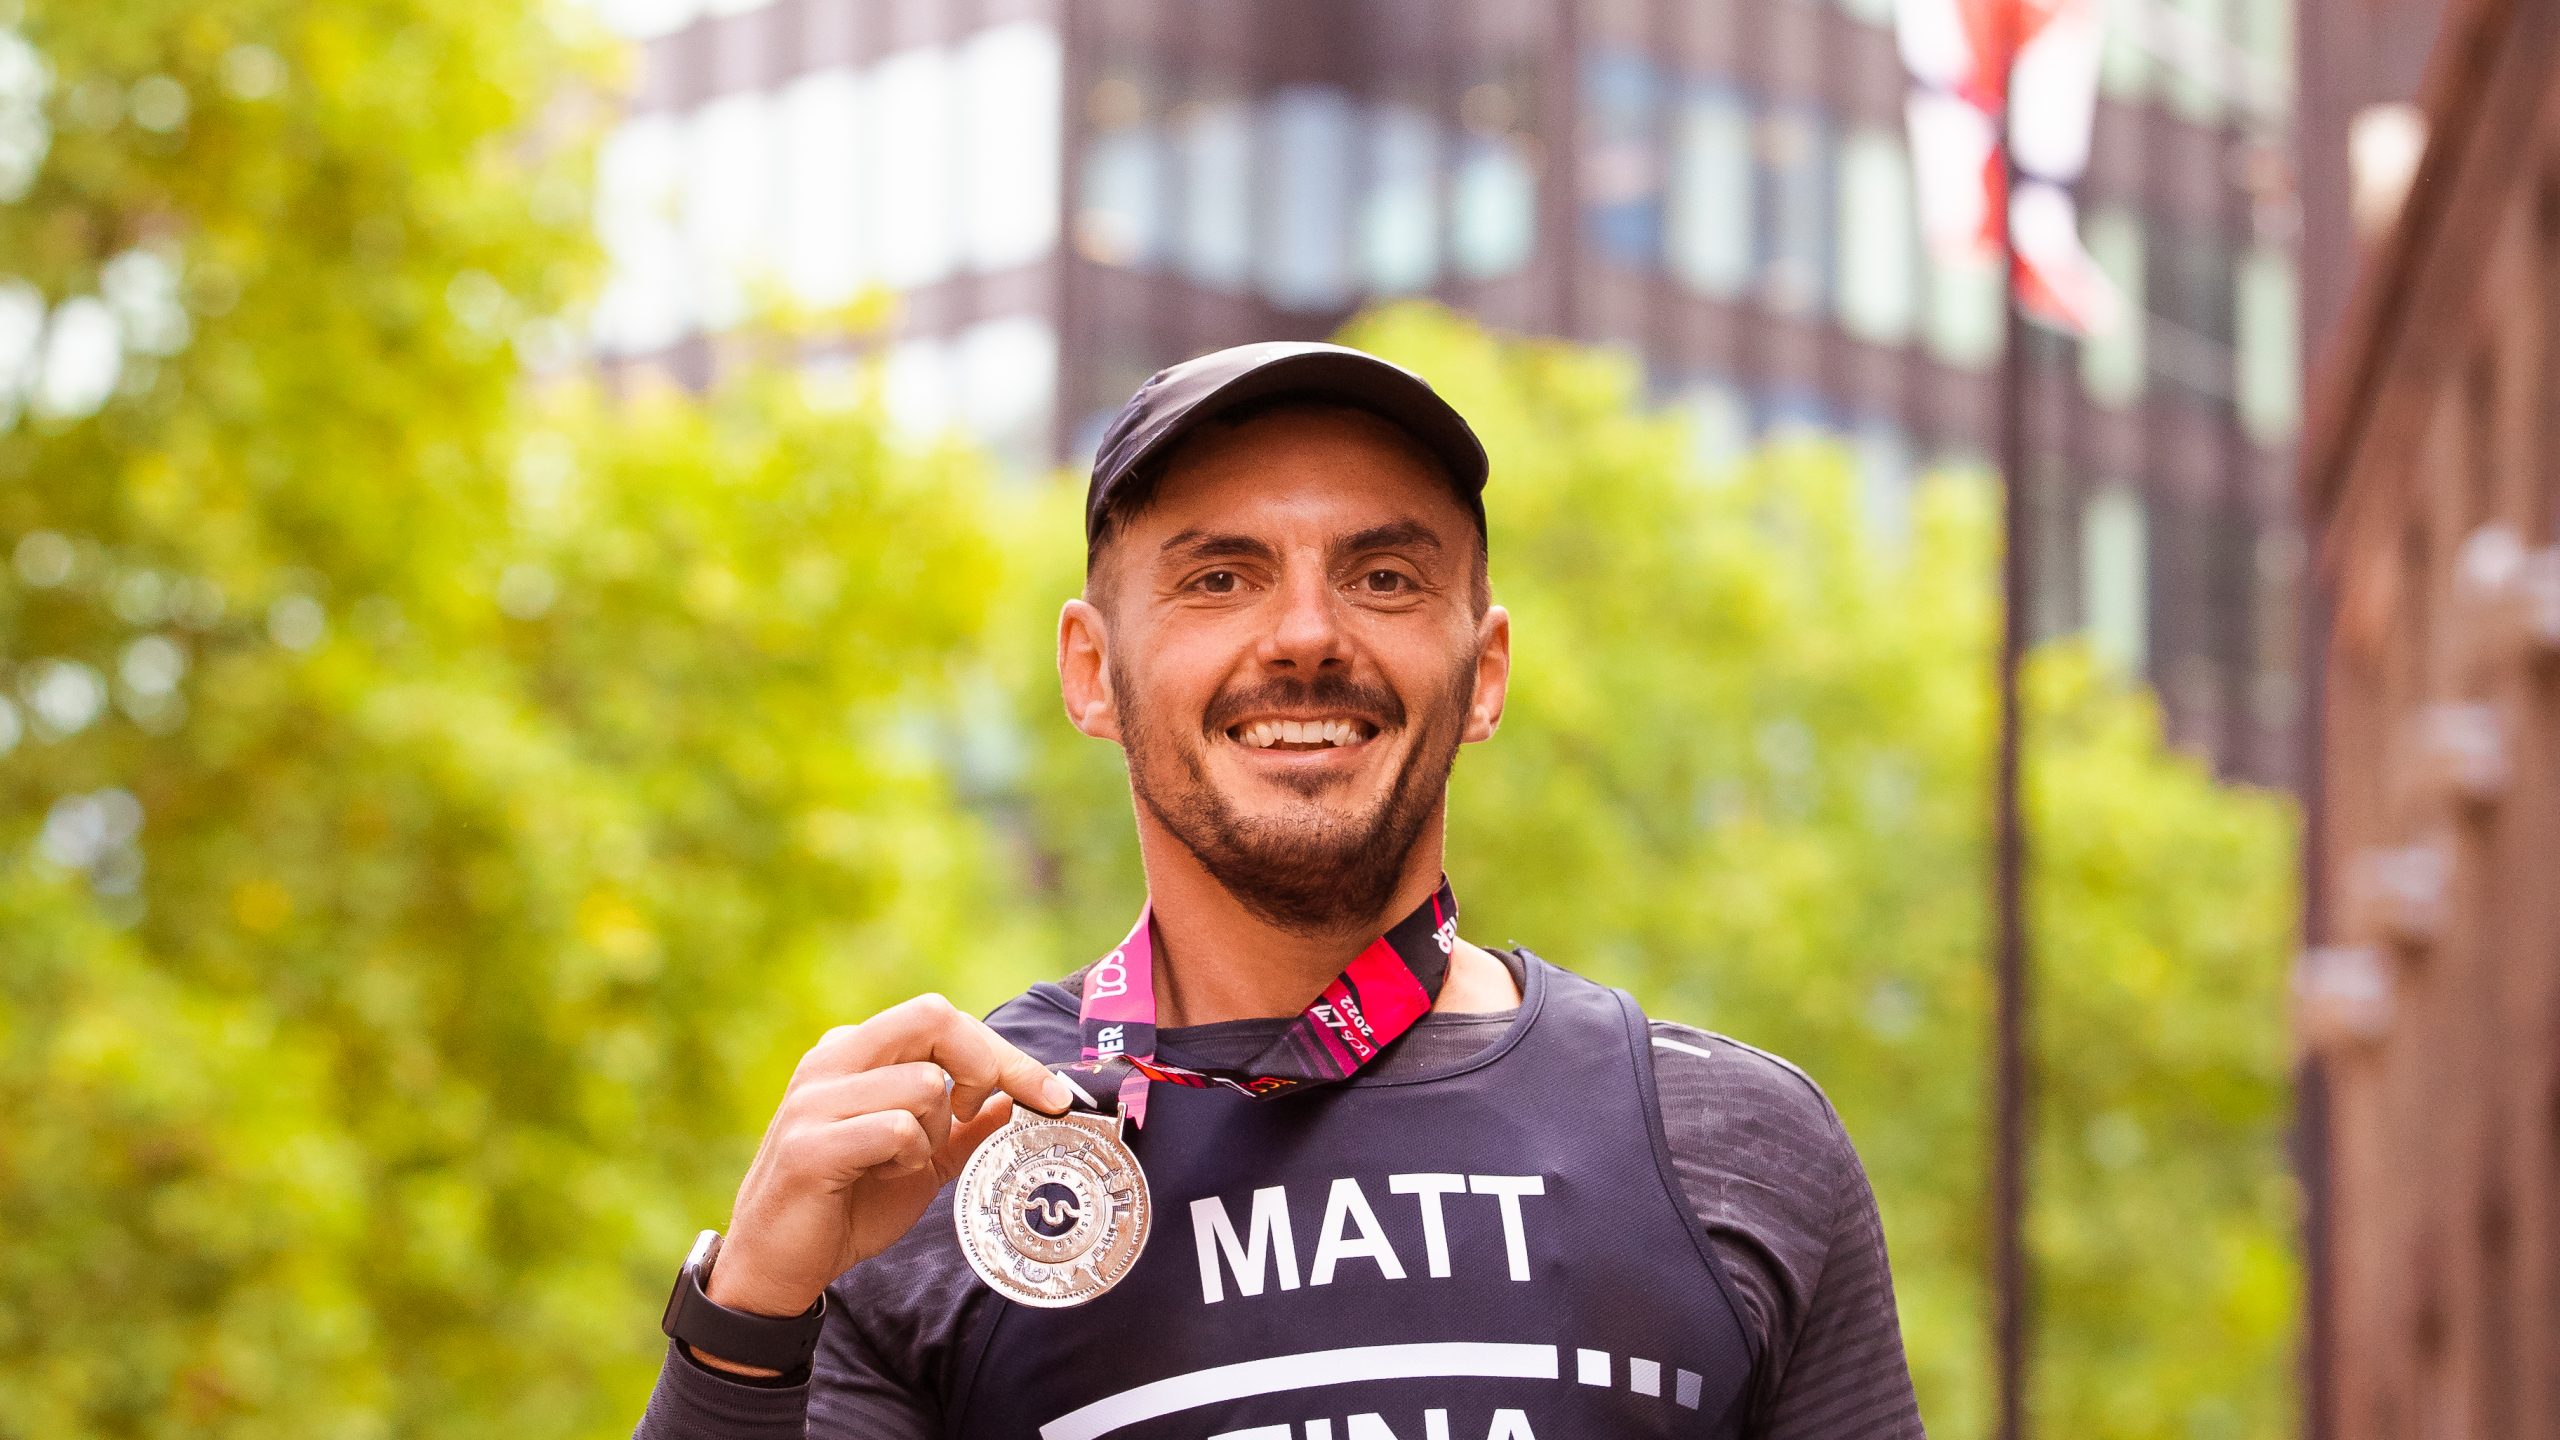 A male runner smiles as he holds his London Marathon medal.